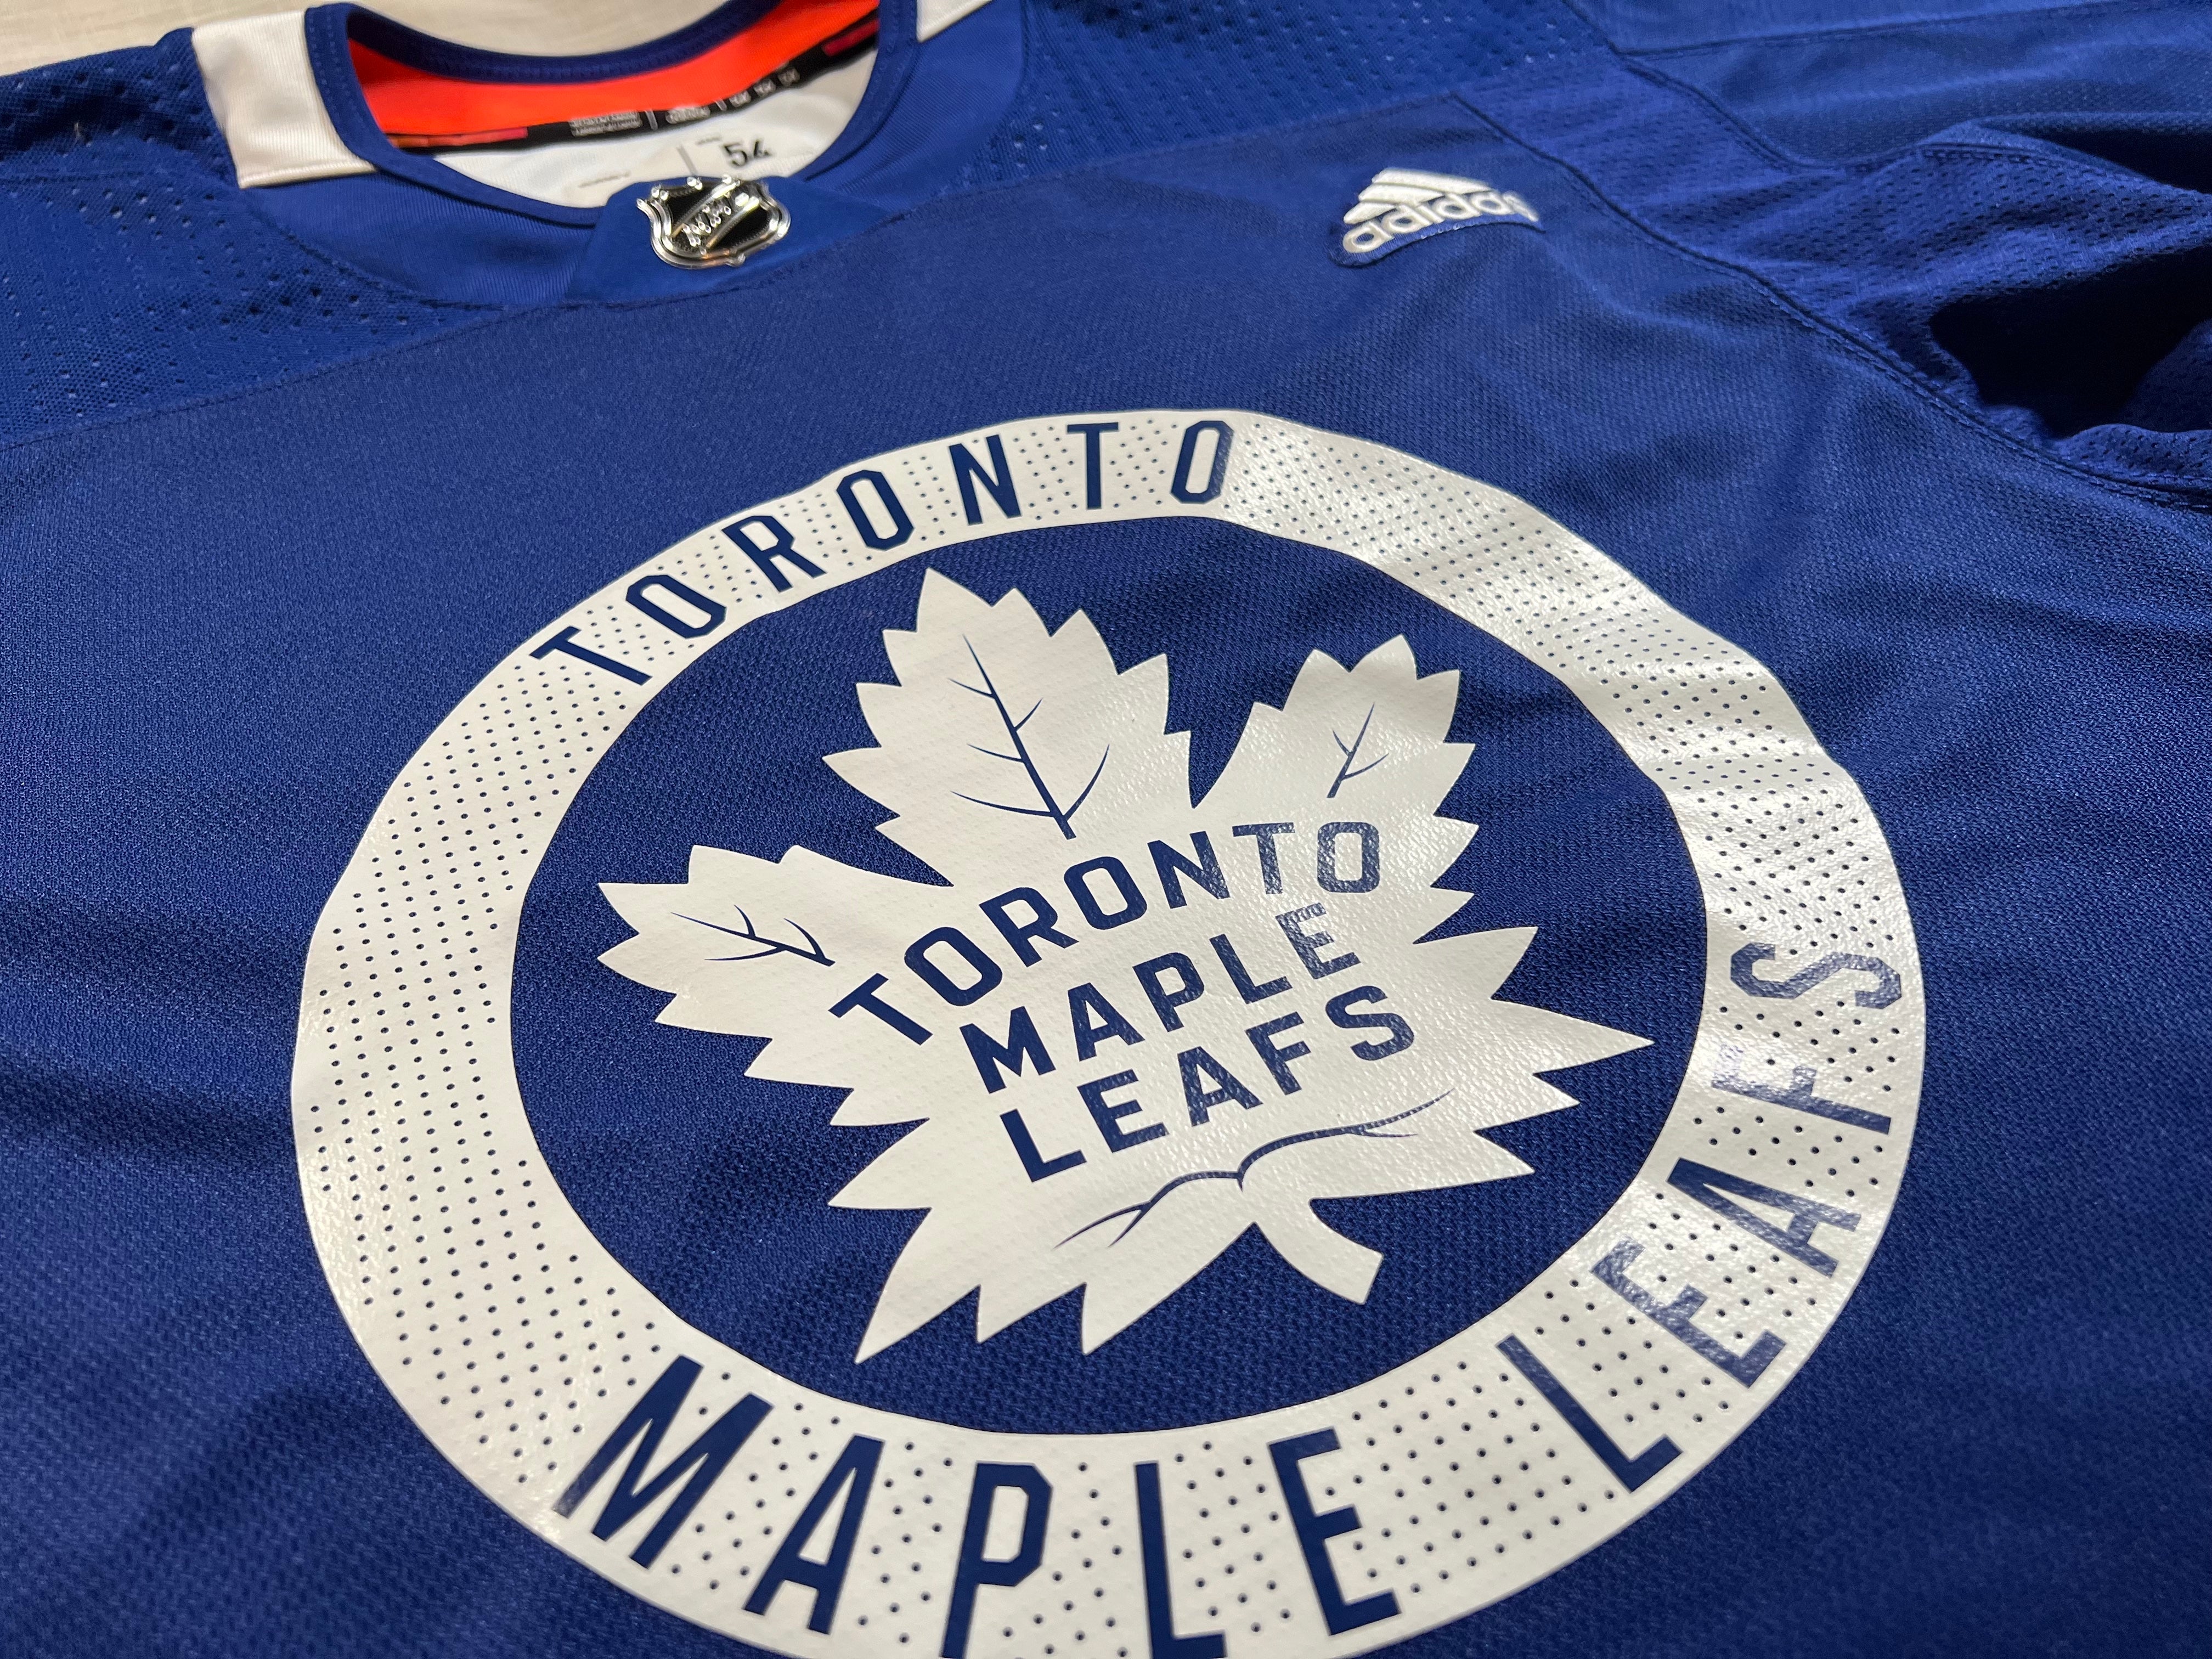 Toronto Maple Leafs Home Adult Size 54 Adidas Jersey